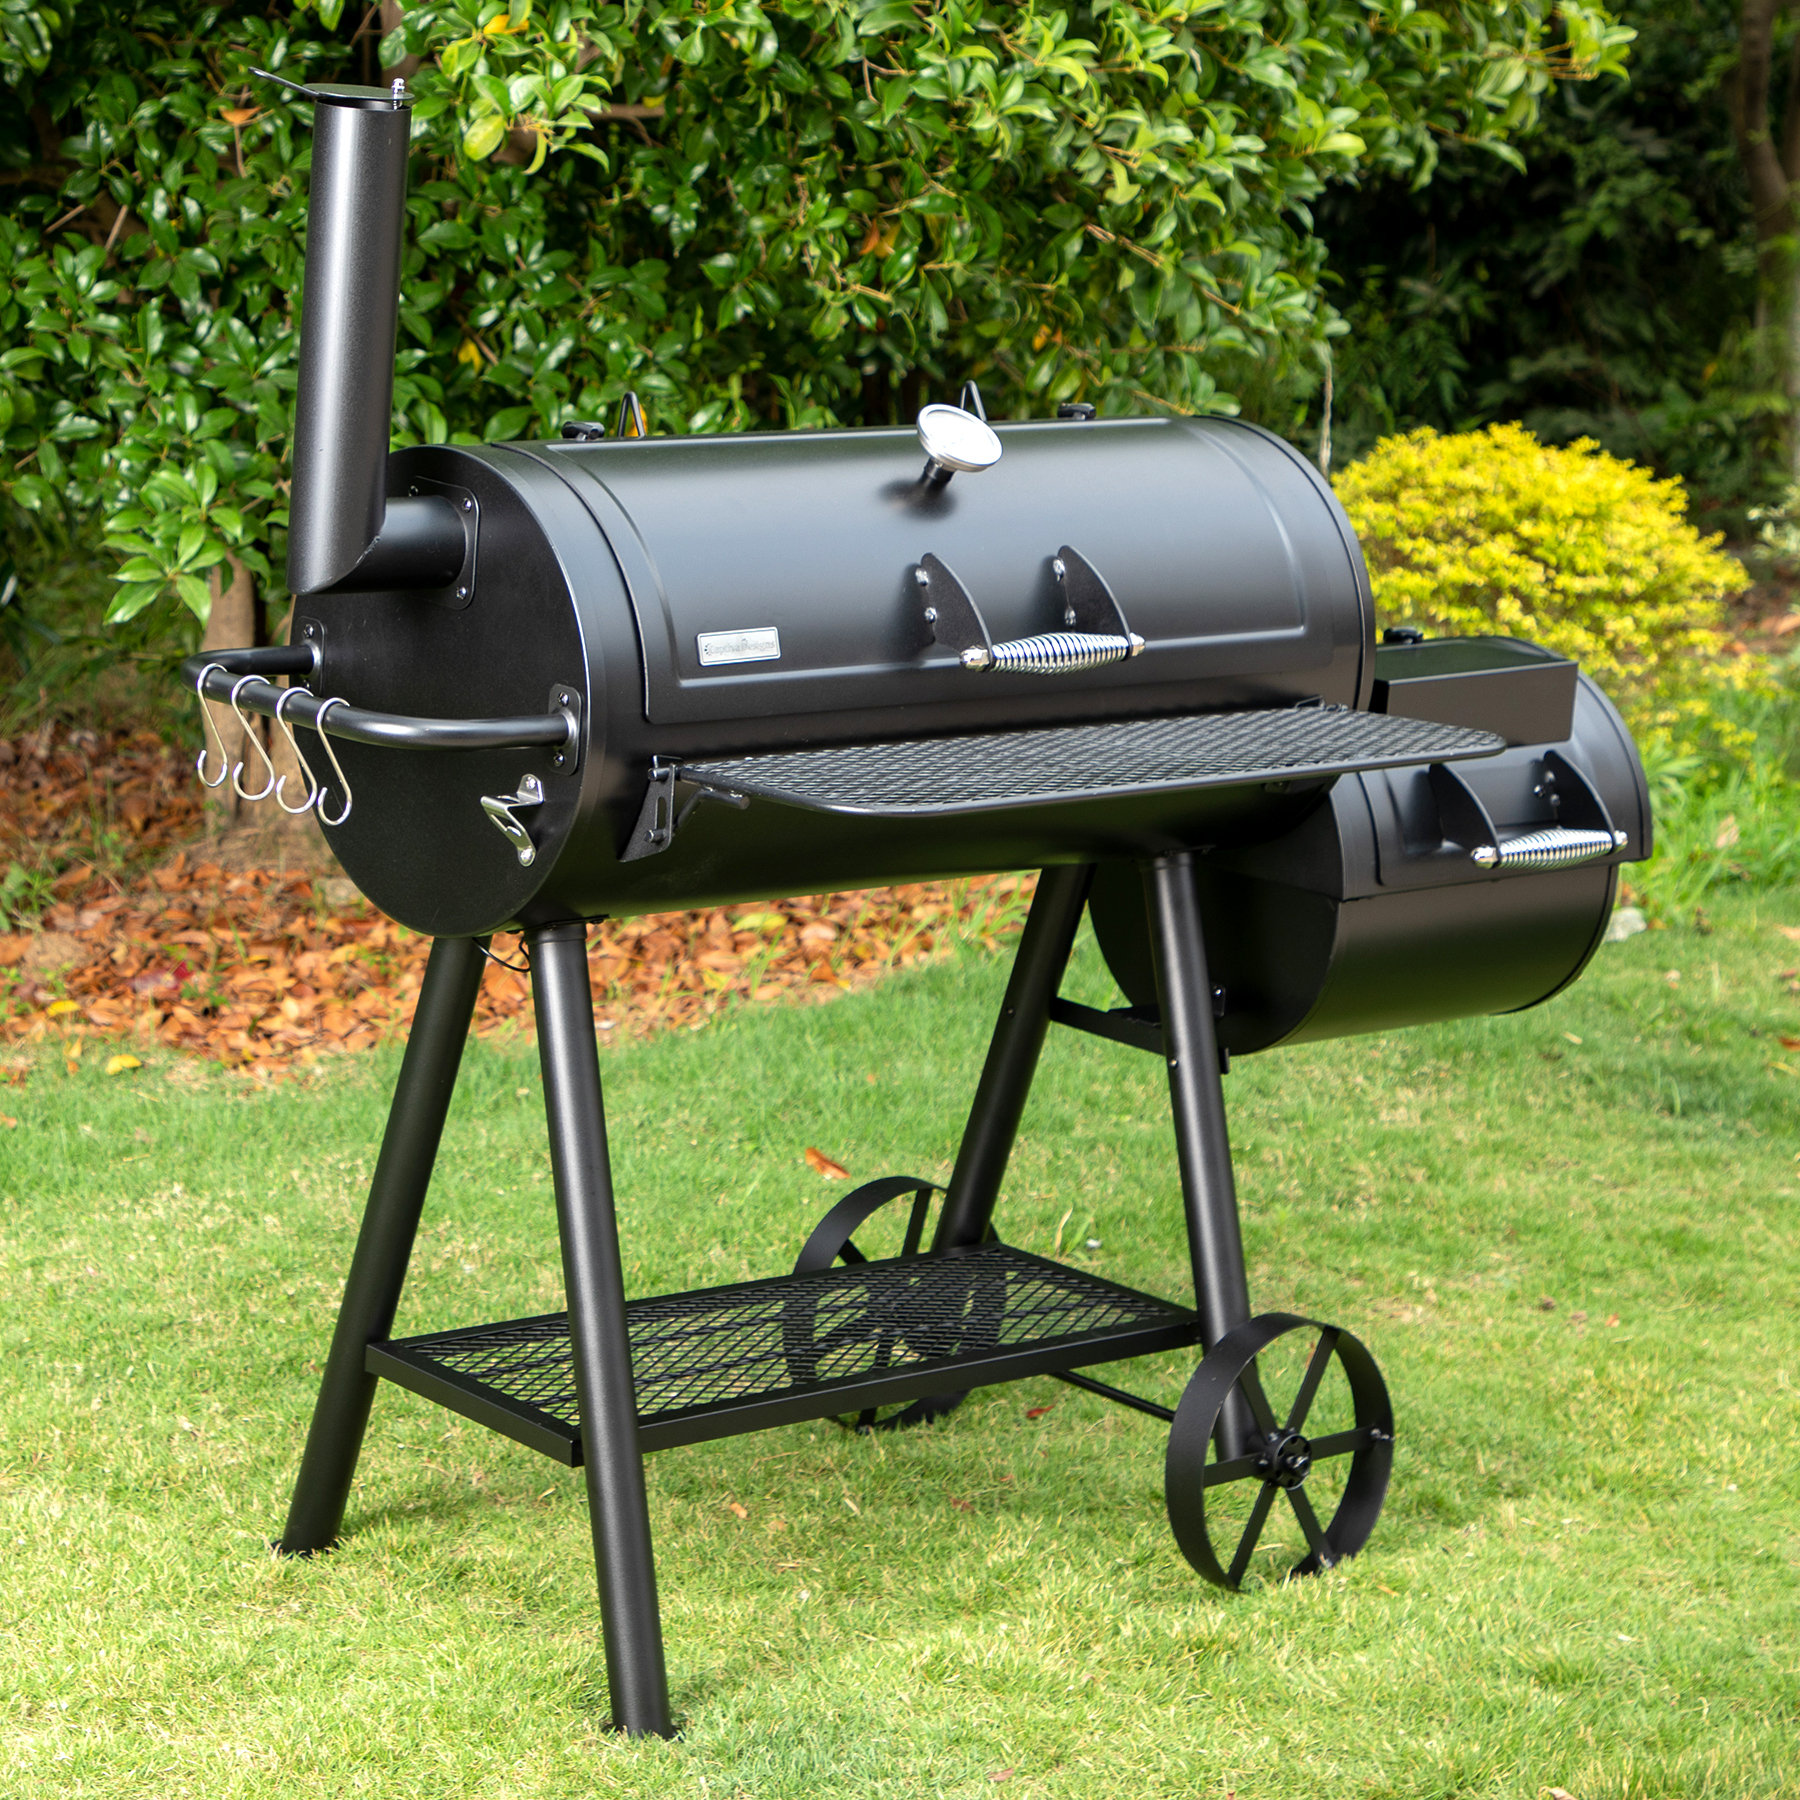 Monica Indskrive bønner Alphamarts Free-standing 36” Barrel Charcoal Grill w/ Offset Smoker 941 sq.  in for Camping, Backyard Cooking & Reviews | Wayfair